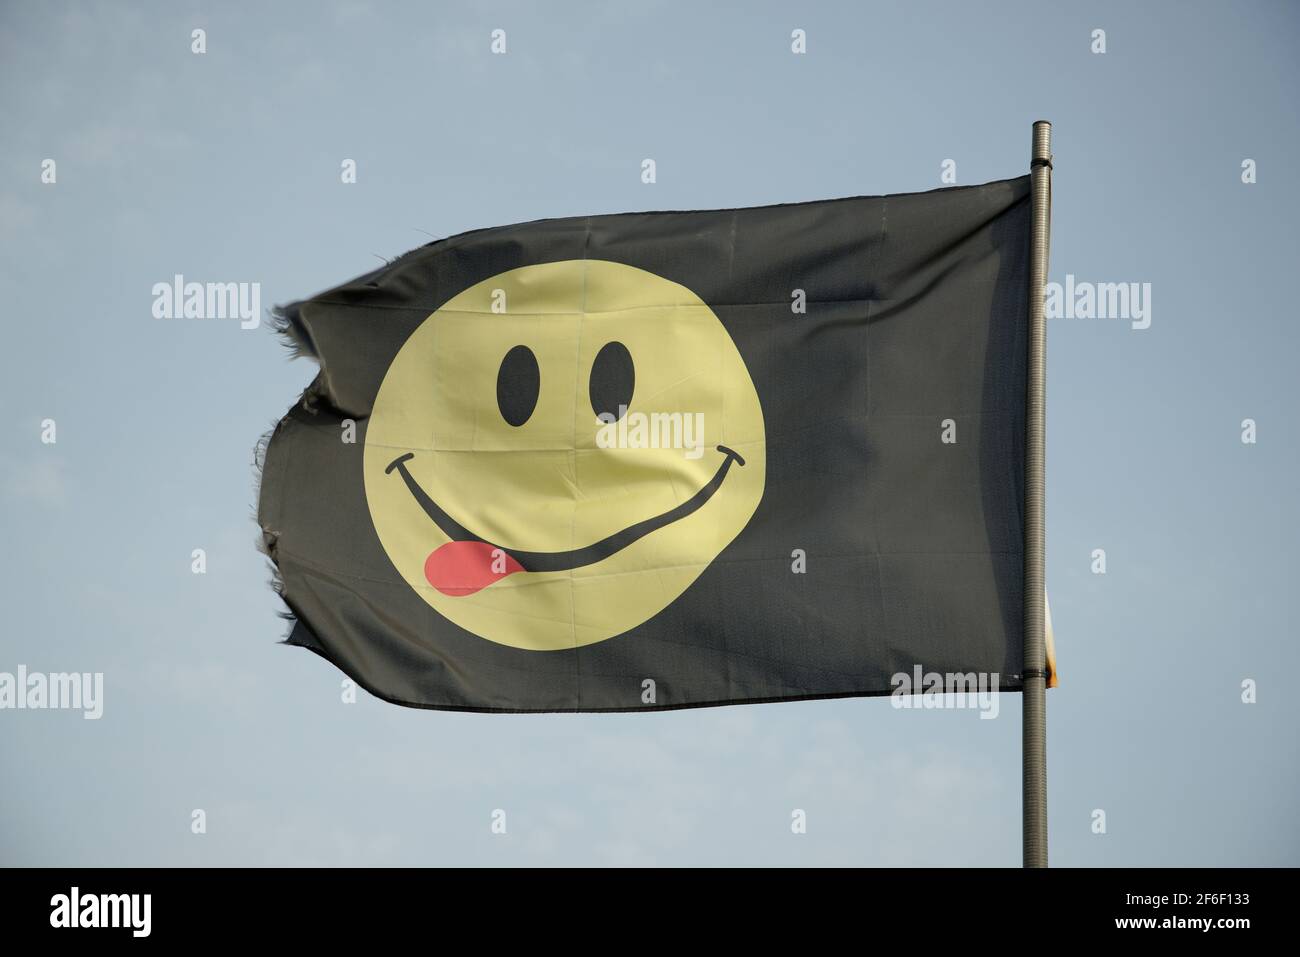 A smiley face house music flag. Happy face festival symbol with a red tongue! Yum yum. Stock Photo